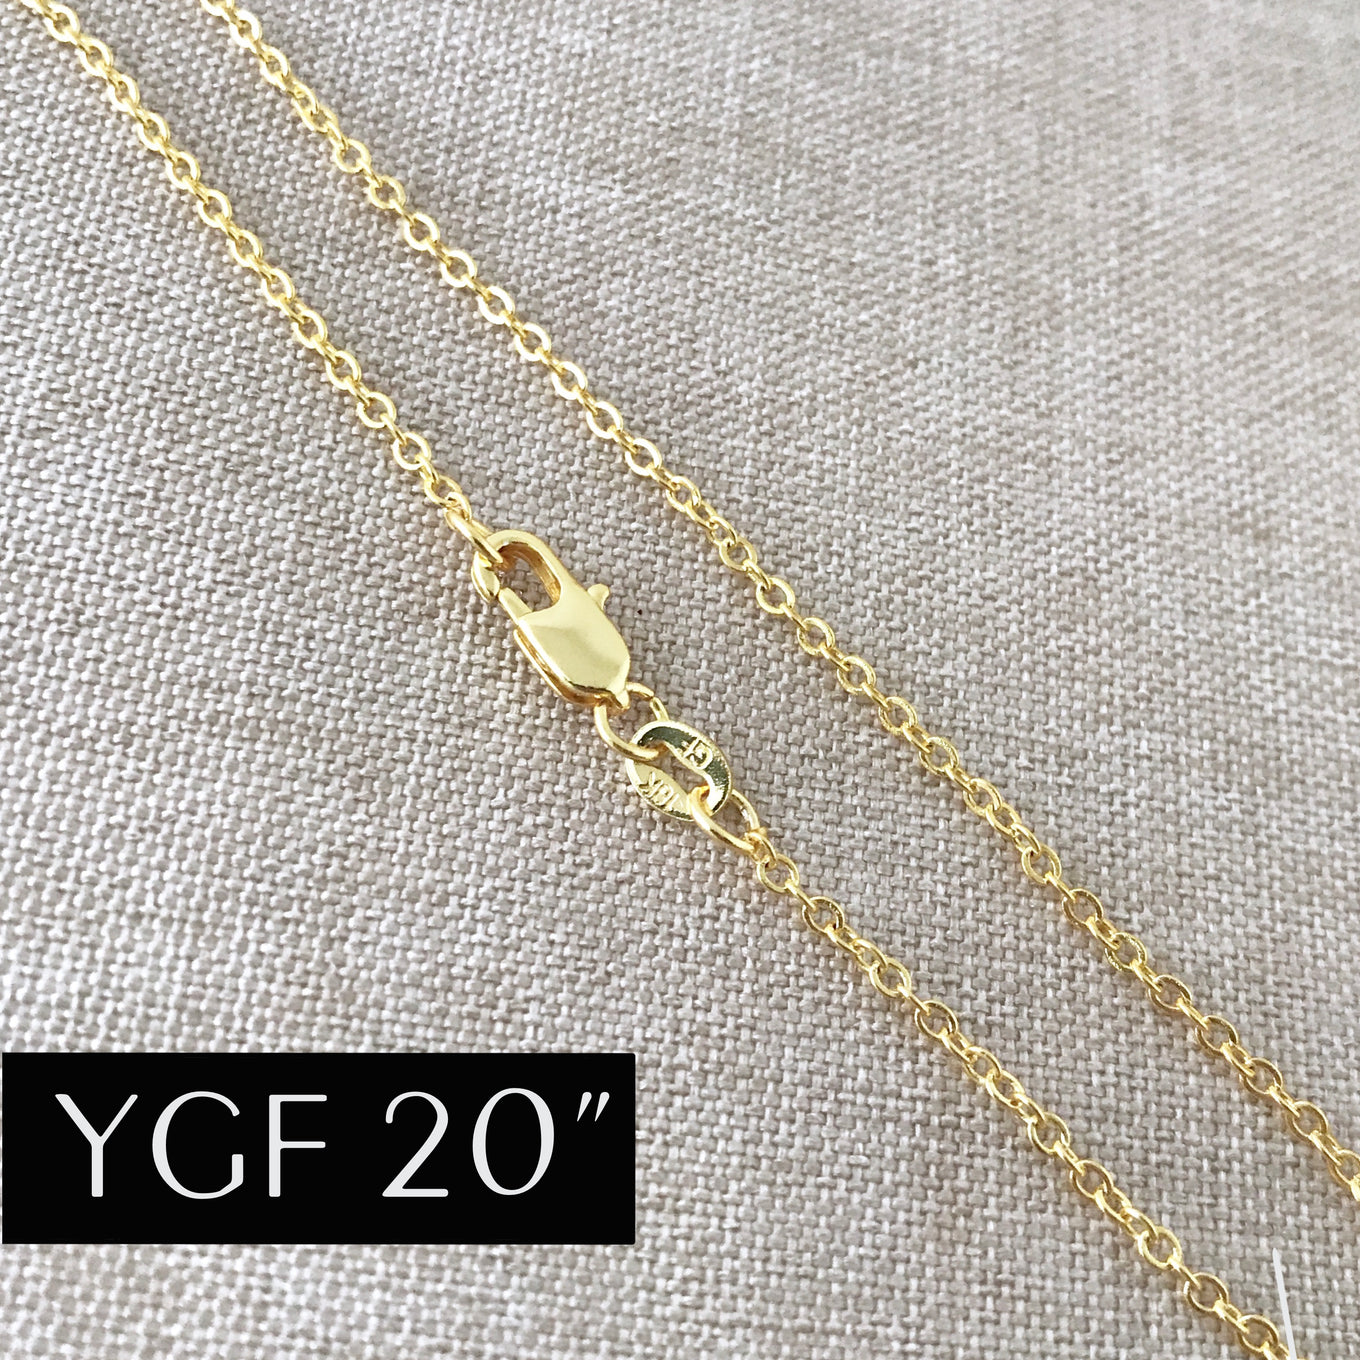 1/20 14k gf Gold Filled Chain Necklace 18